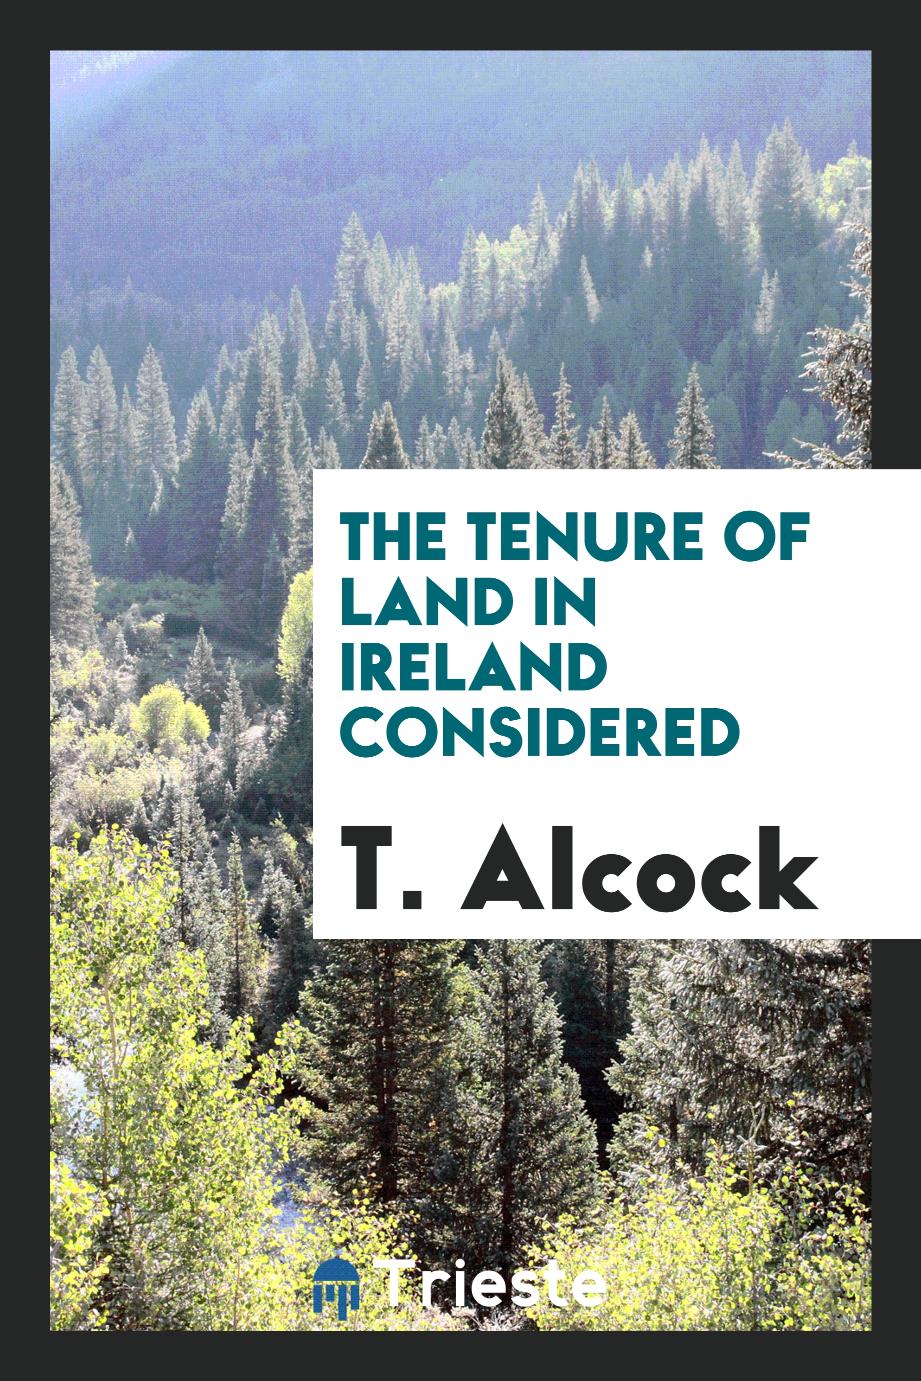 The Tenure of Land in Ireland considered